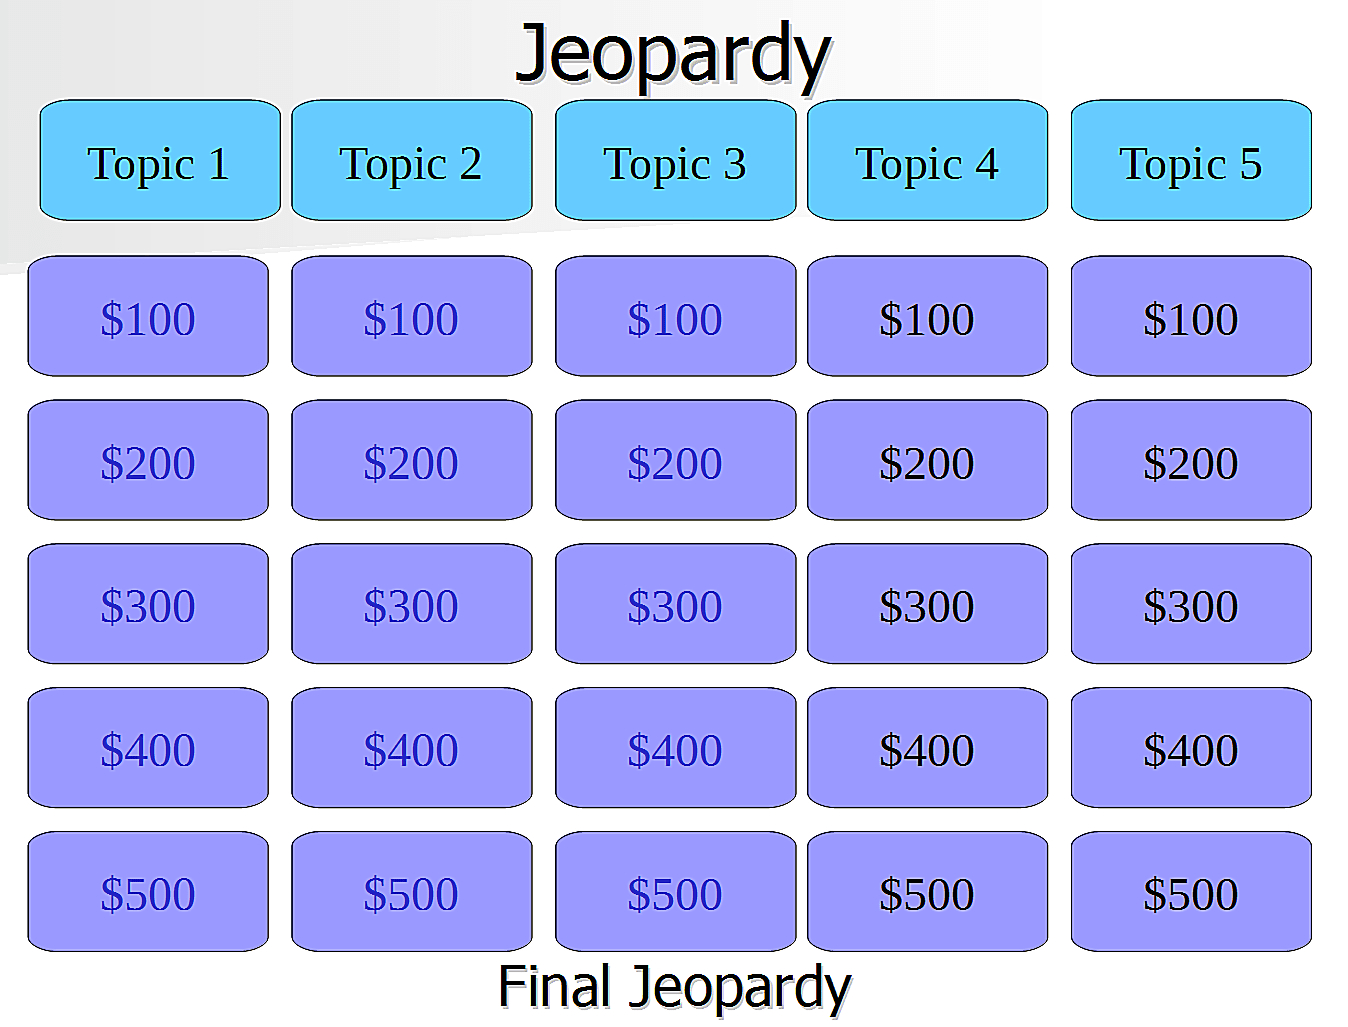 Free Jeopardy Templates For The Classroom in Jeopardy Powerpoint Template With Score